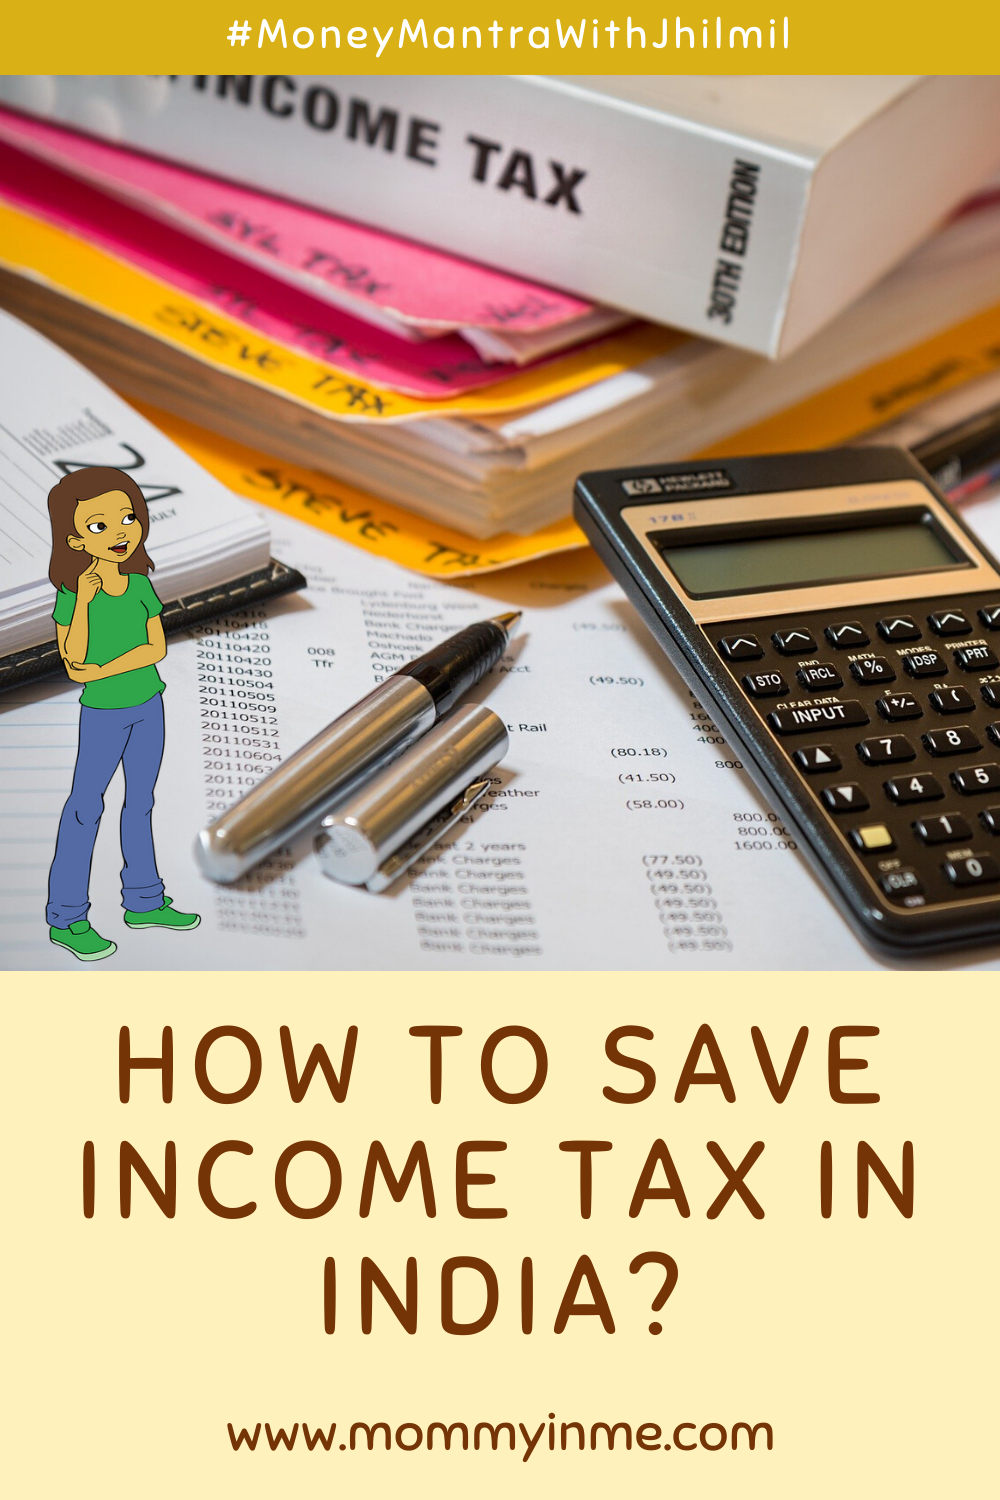 How to save Income Tax in India, in a legit manner, under Income Tax Act, 1961? Here are some popular sections and schemes to save Income Tax. #IncomeTax #savetax #taxationinindia #savetaxinindia #PPF #ULIP #ELSS #NPS #Incometaxact